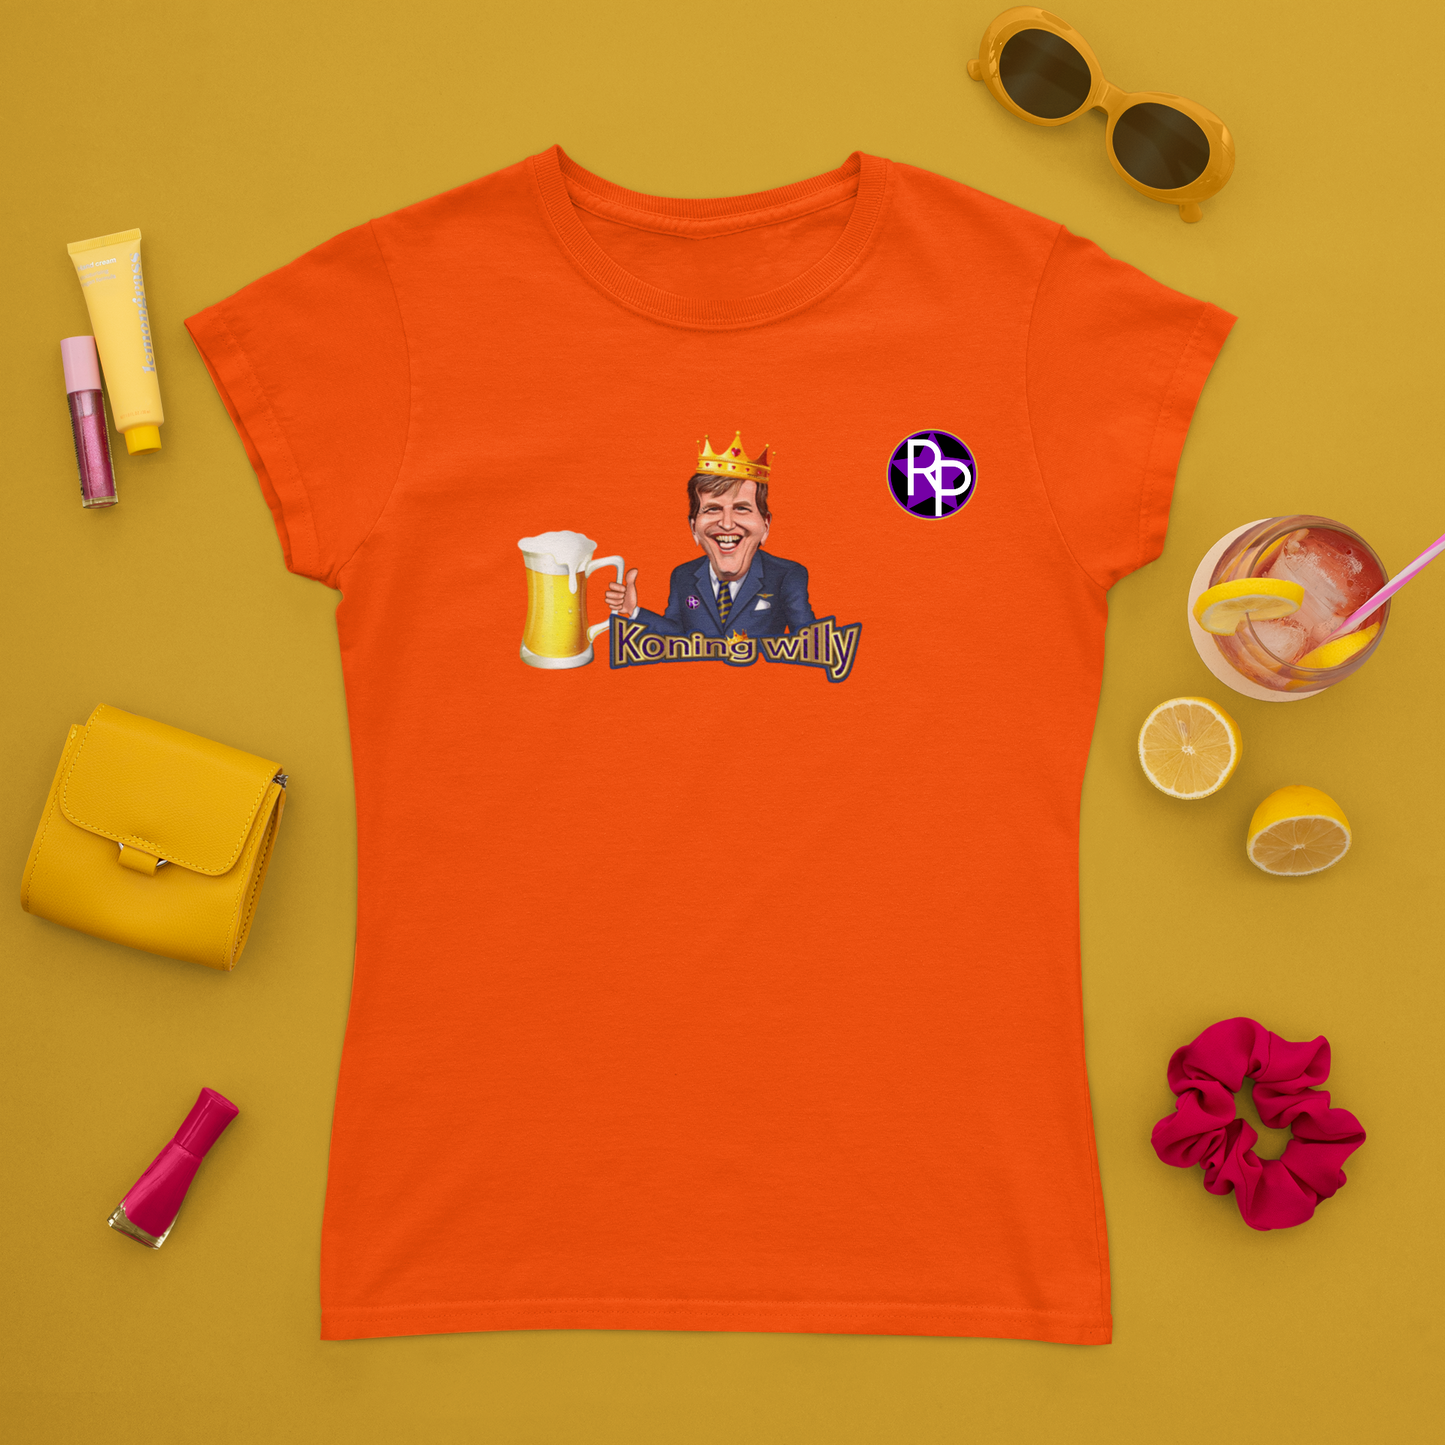 Koning Willy T-Shirt voor dames